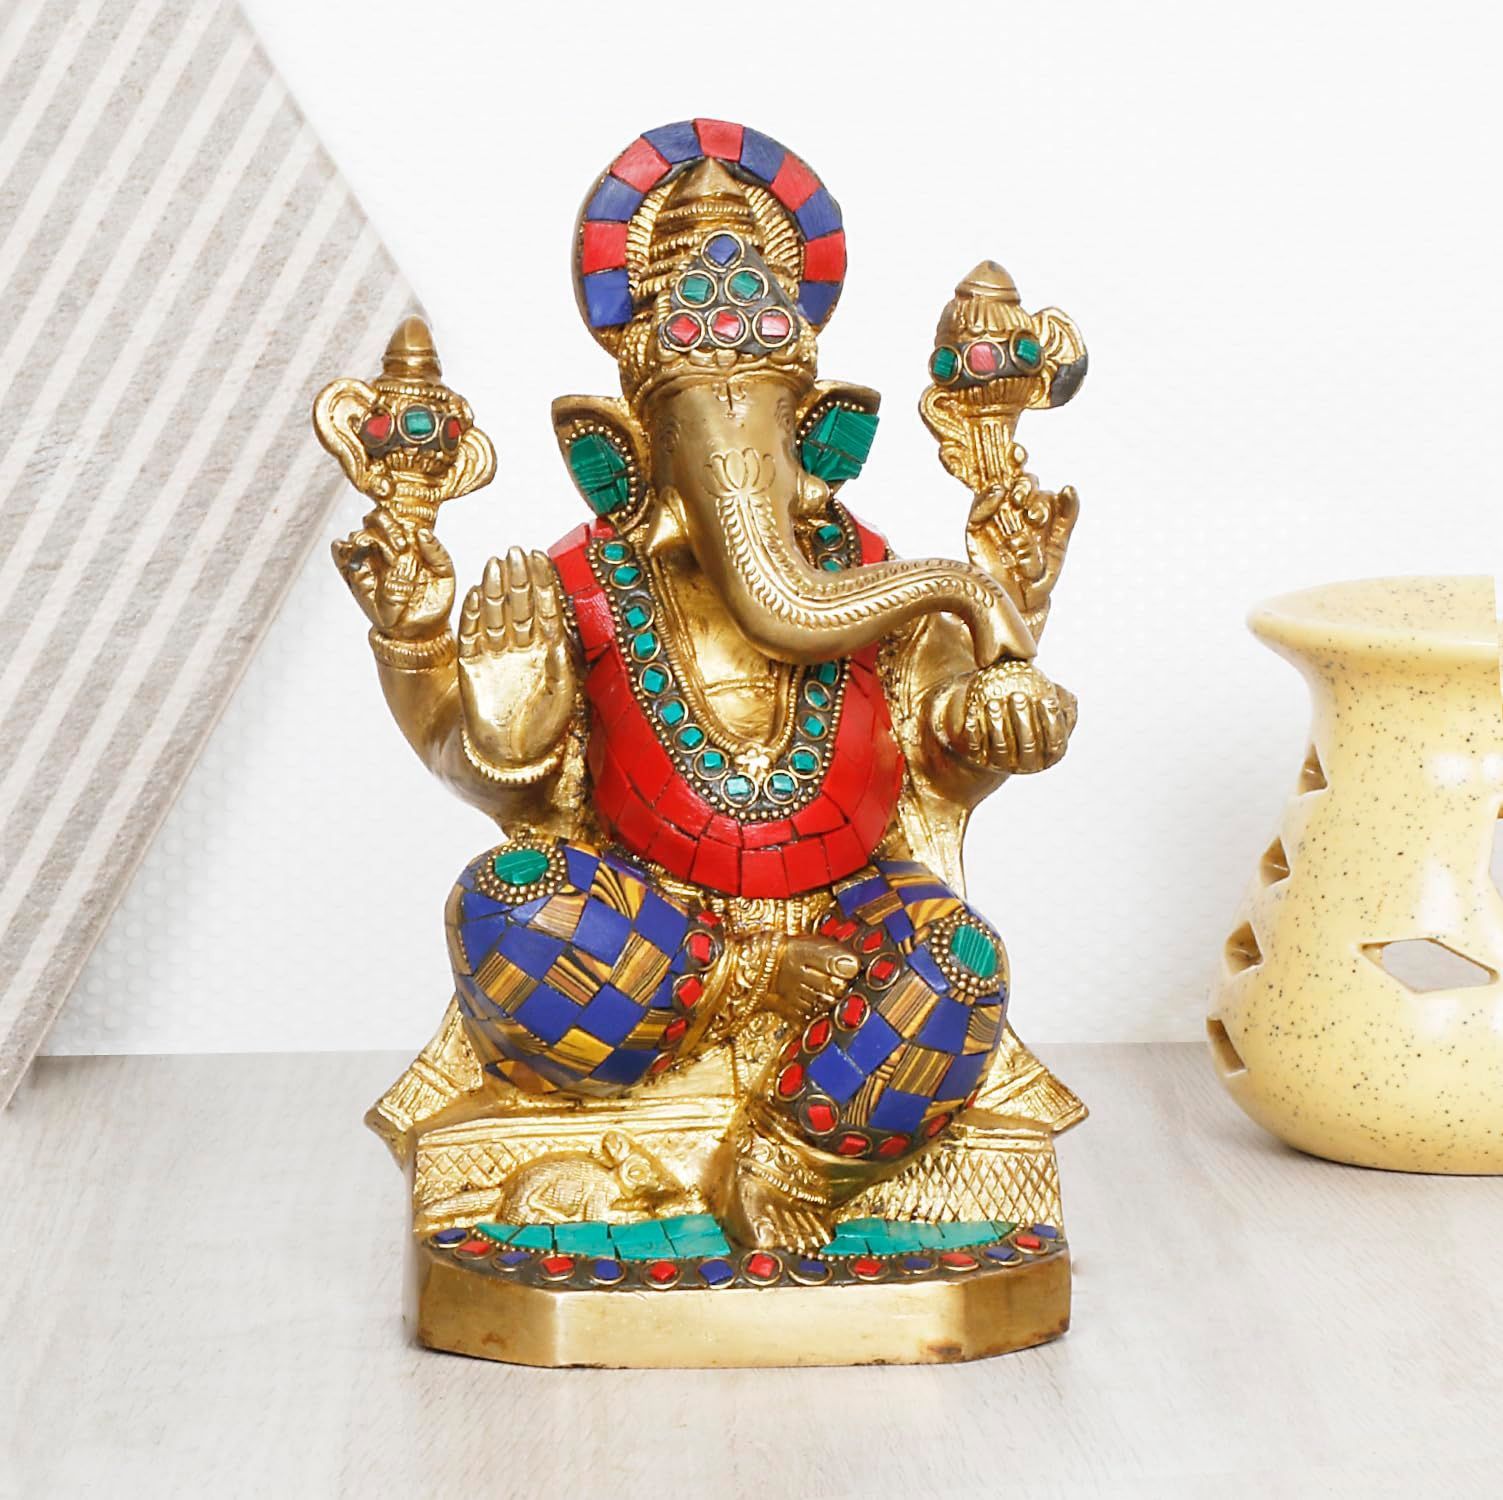 Desi Decor Gold Plated Lord Ganesh Idol | Ganesha Figurine for Home Decor  Statue | Resting on Pillow Blessing Ganpati Murti Luck & Success Diwali  Gifts Home Temple(White, Size: 15 x 15